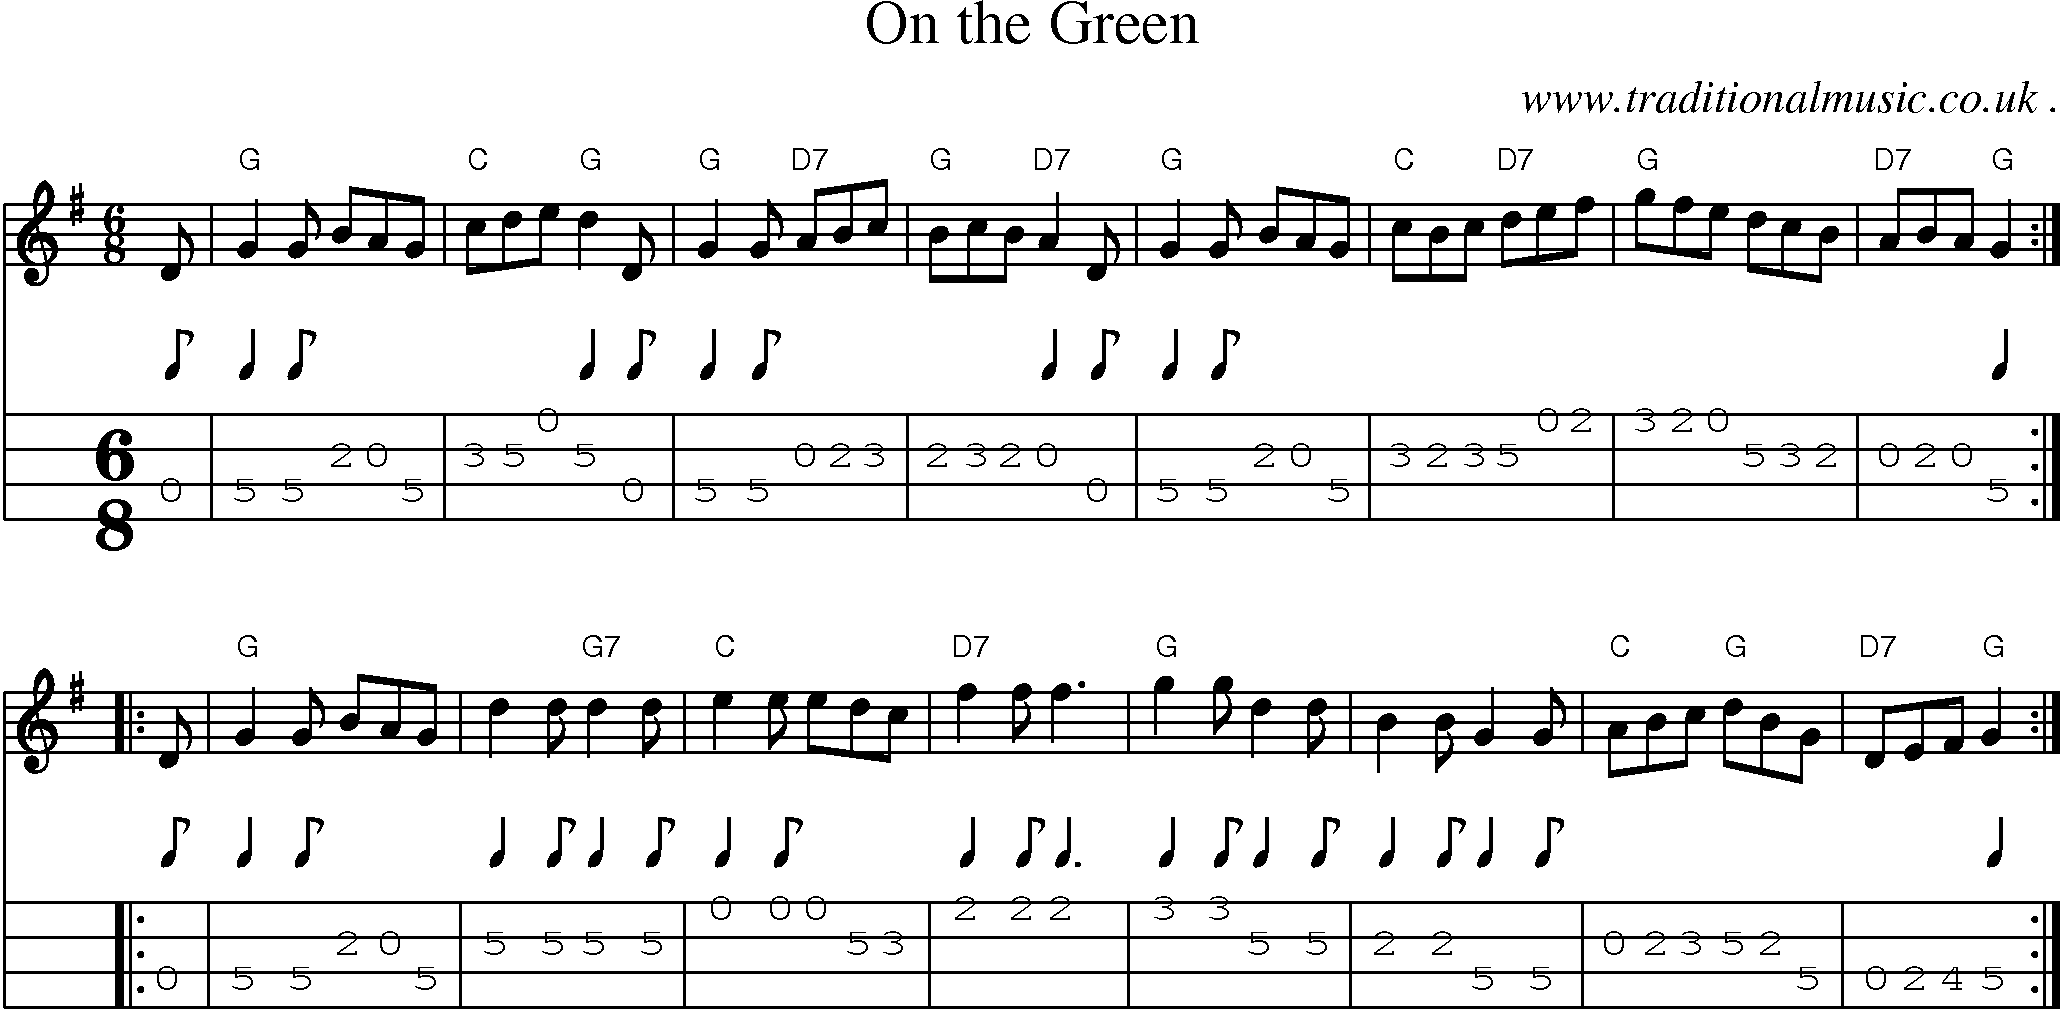 Sheet-music  score, Chords and Mandolin Tabs for On The Green